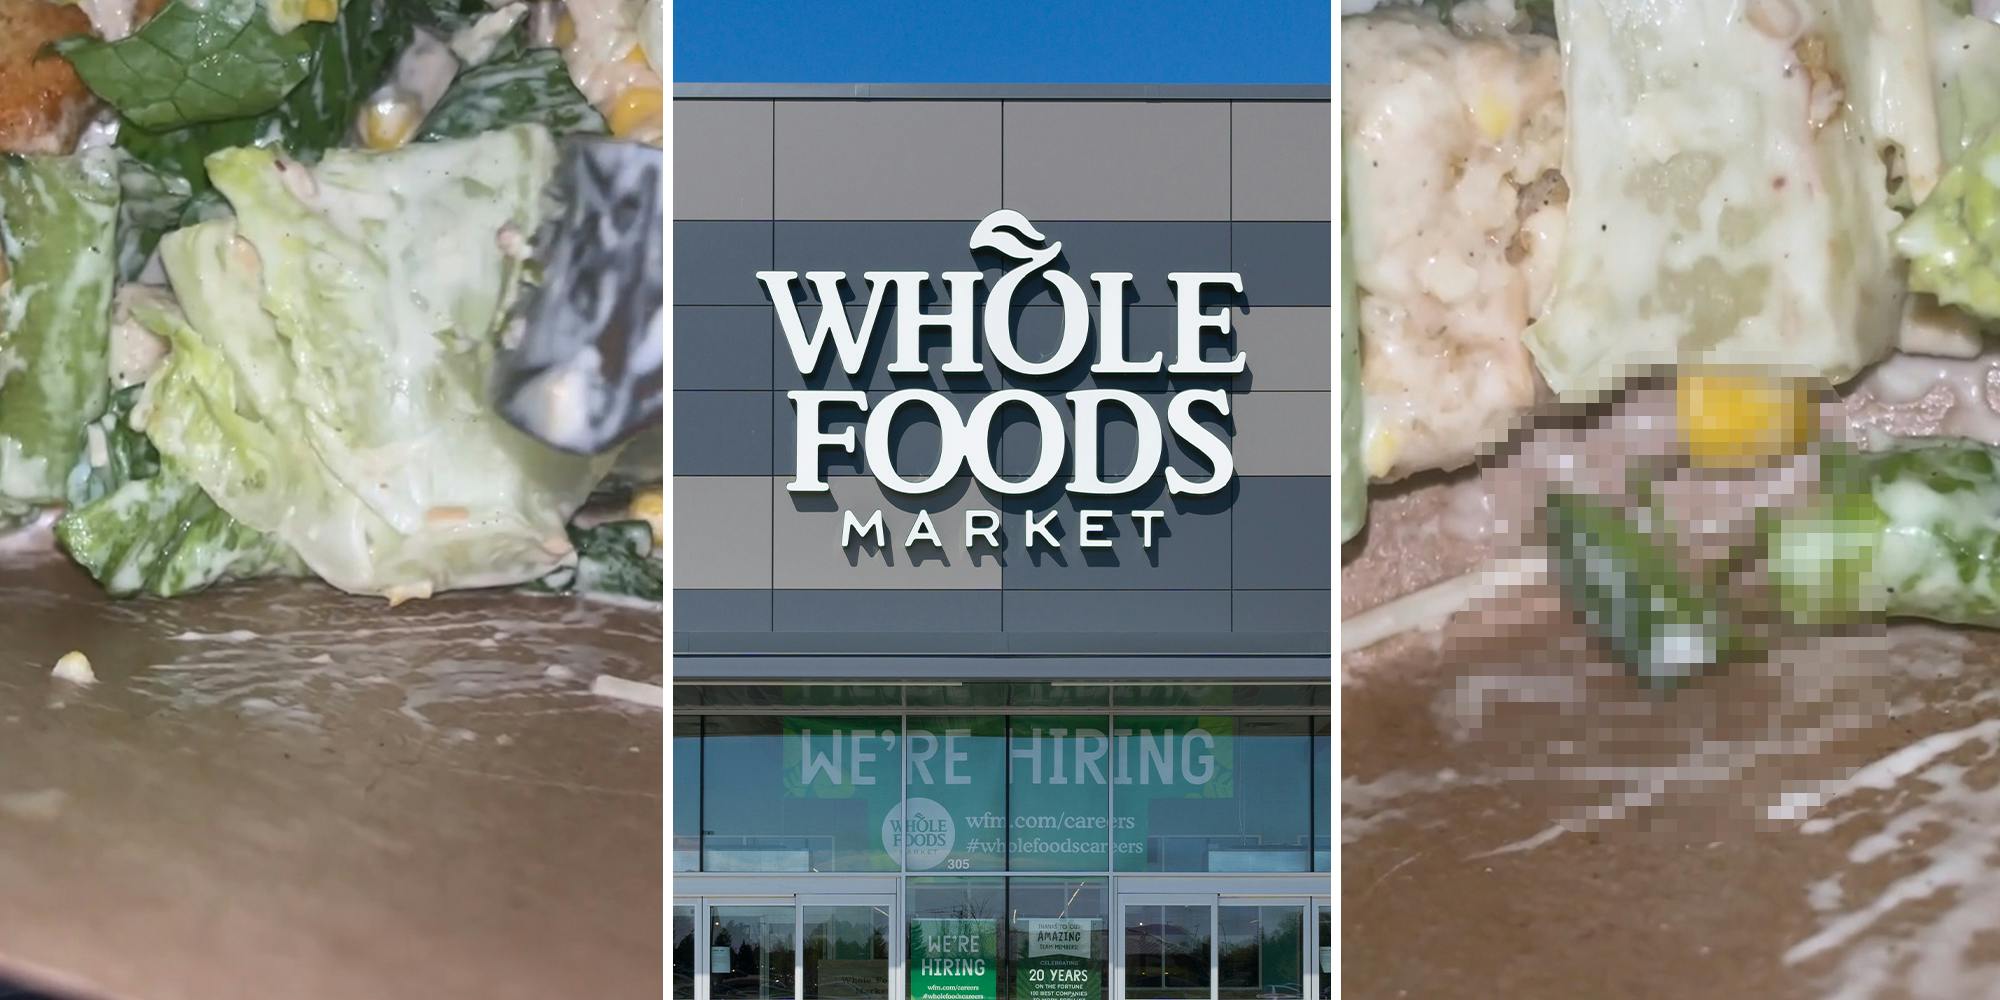 Woman disgusted after finding something unusual in Whole Foods salad